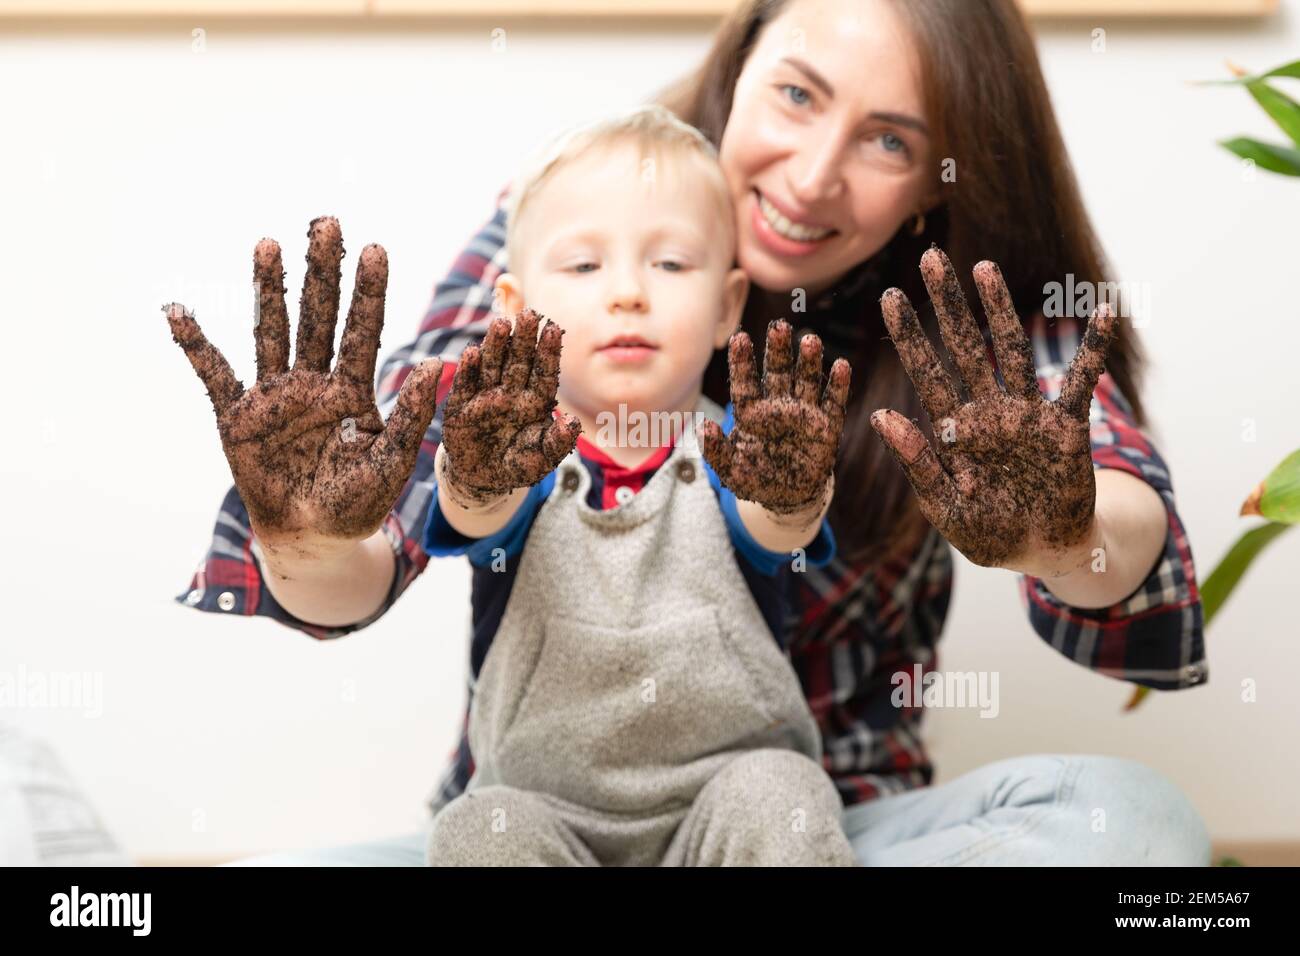 Hobbies at home gardening learning botany - young mother and child showing hands covered in dirt. Stock Photo